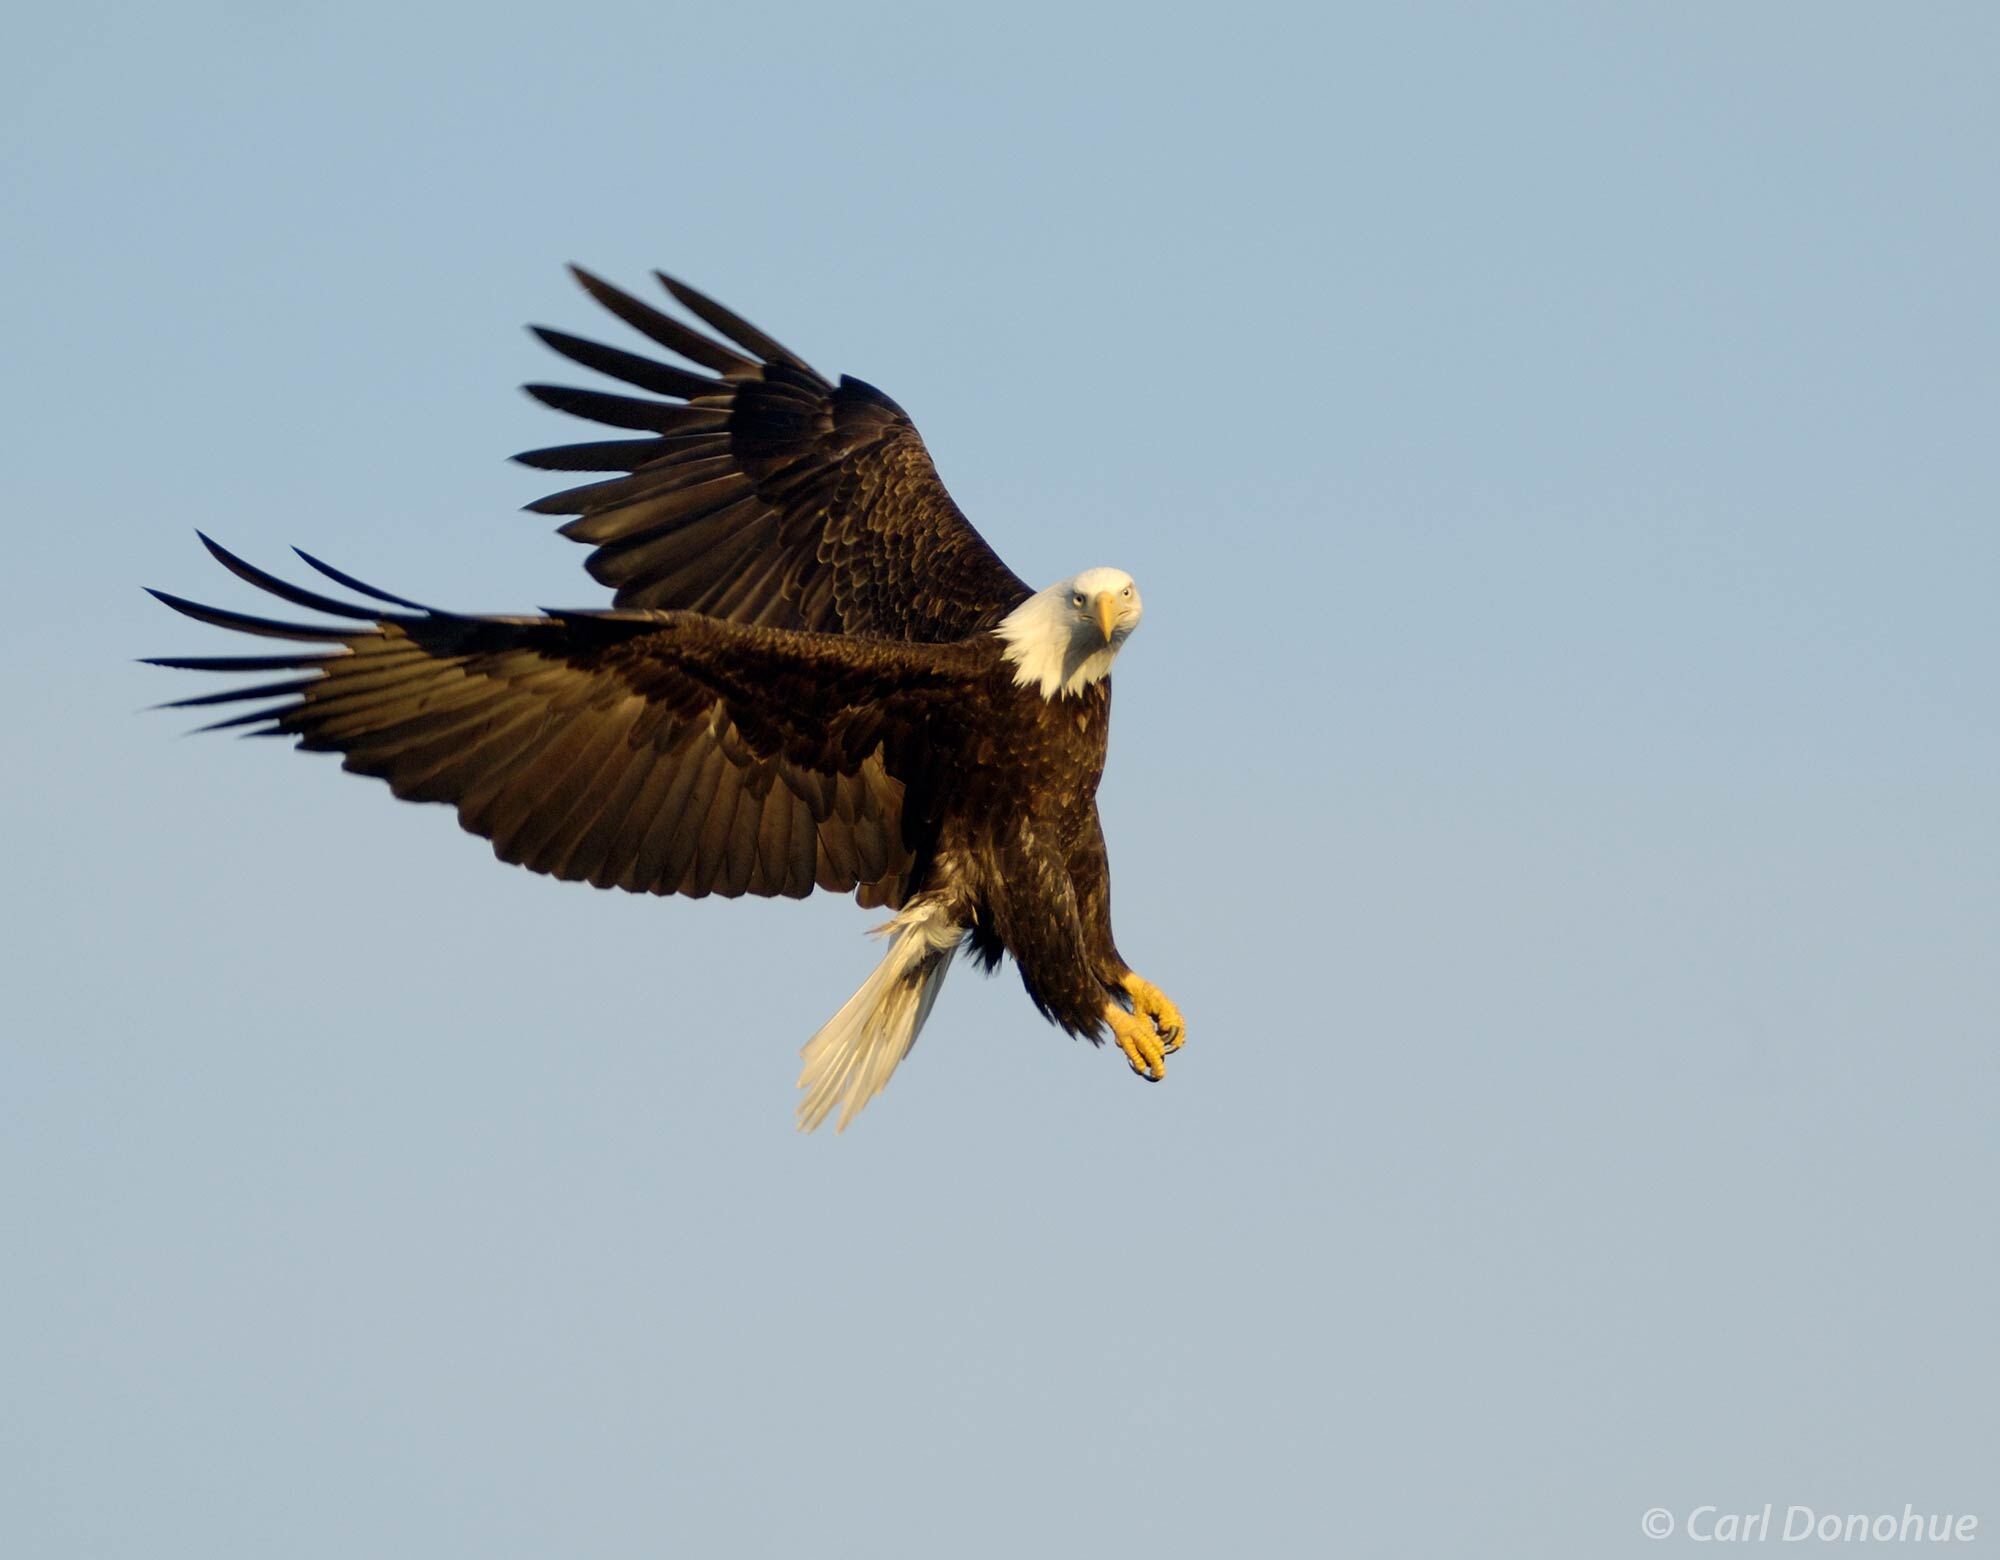 The bald eagle's keen eyesight and powerful wings allow it to easily spot and catch fish in the cold Alaskan waters. Bald eagle...